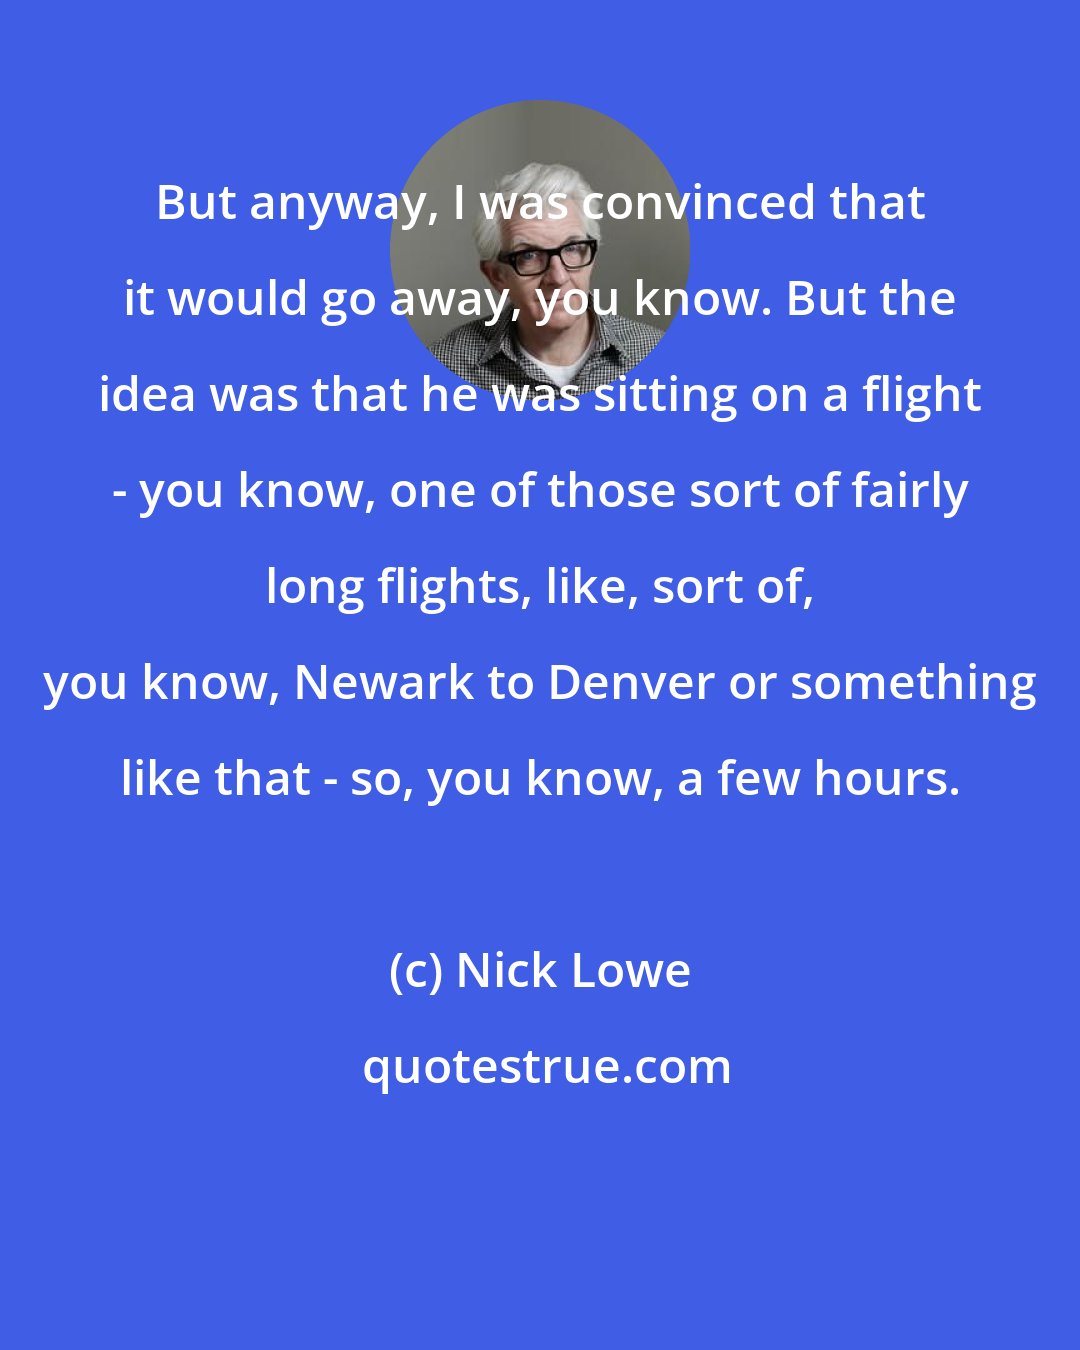 Nick Lowe: But anyway, I was convinced that it would go away, you know. But the idea was that he was sitting on a flight - you know, one of those sort of fairly long flights, like, sort of, you know, Newark to Denver or something like that - so, you know, a few hours.